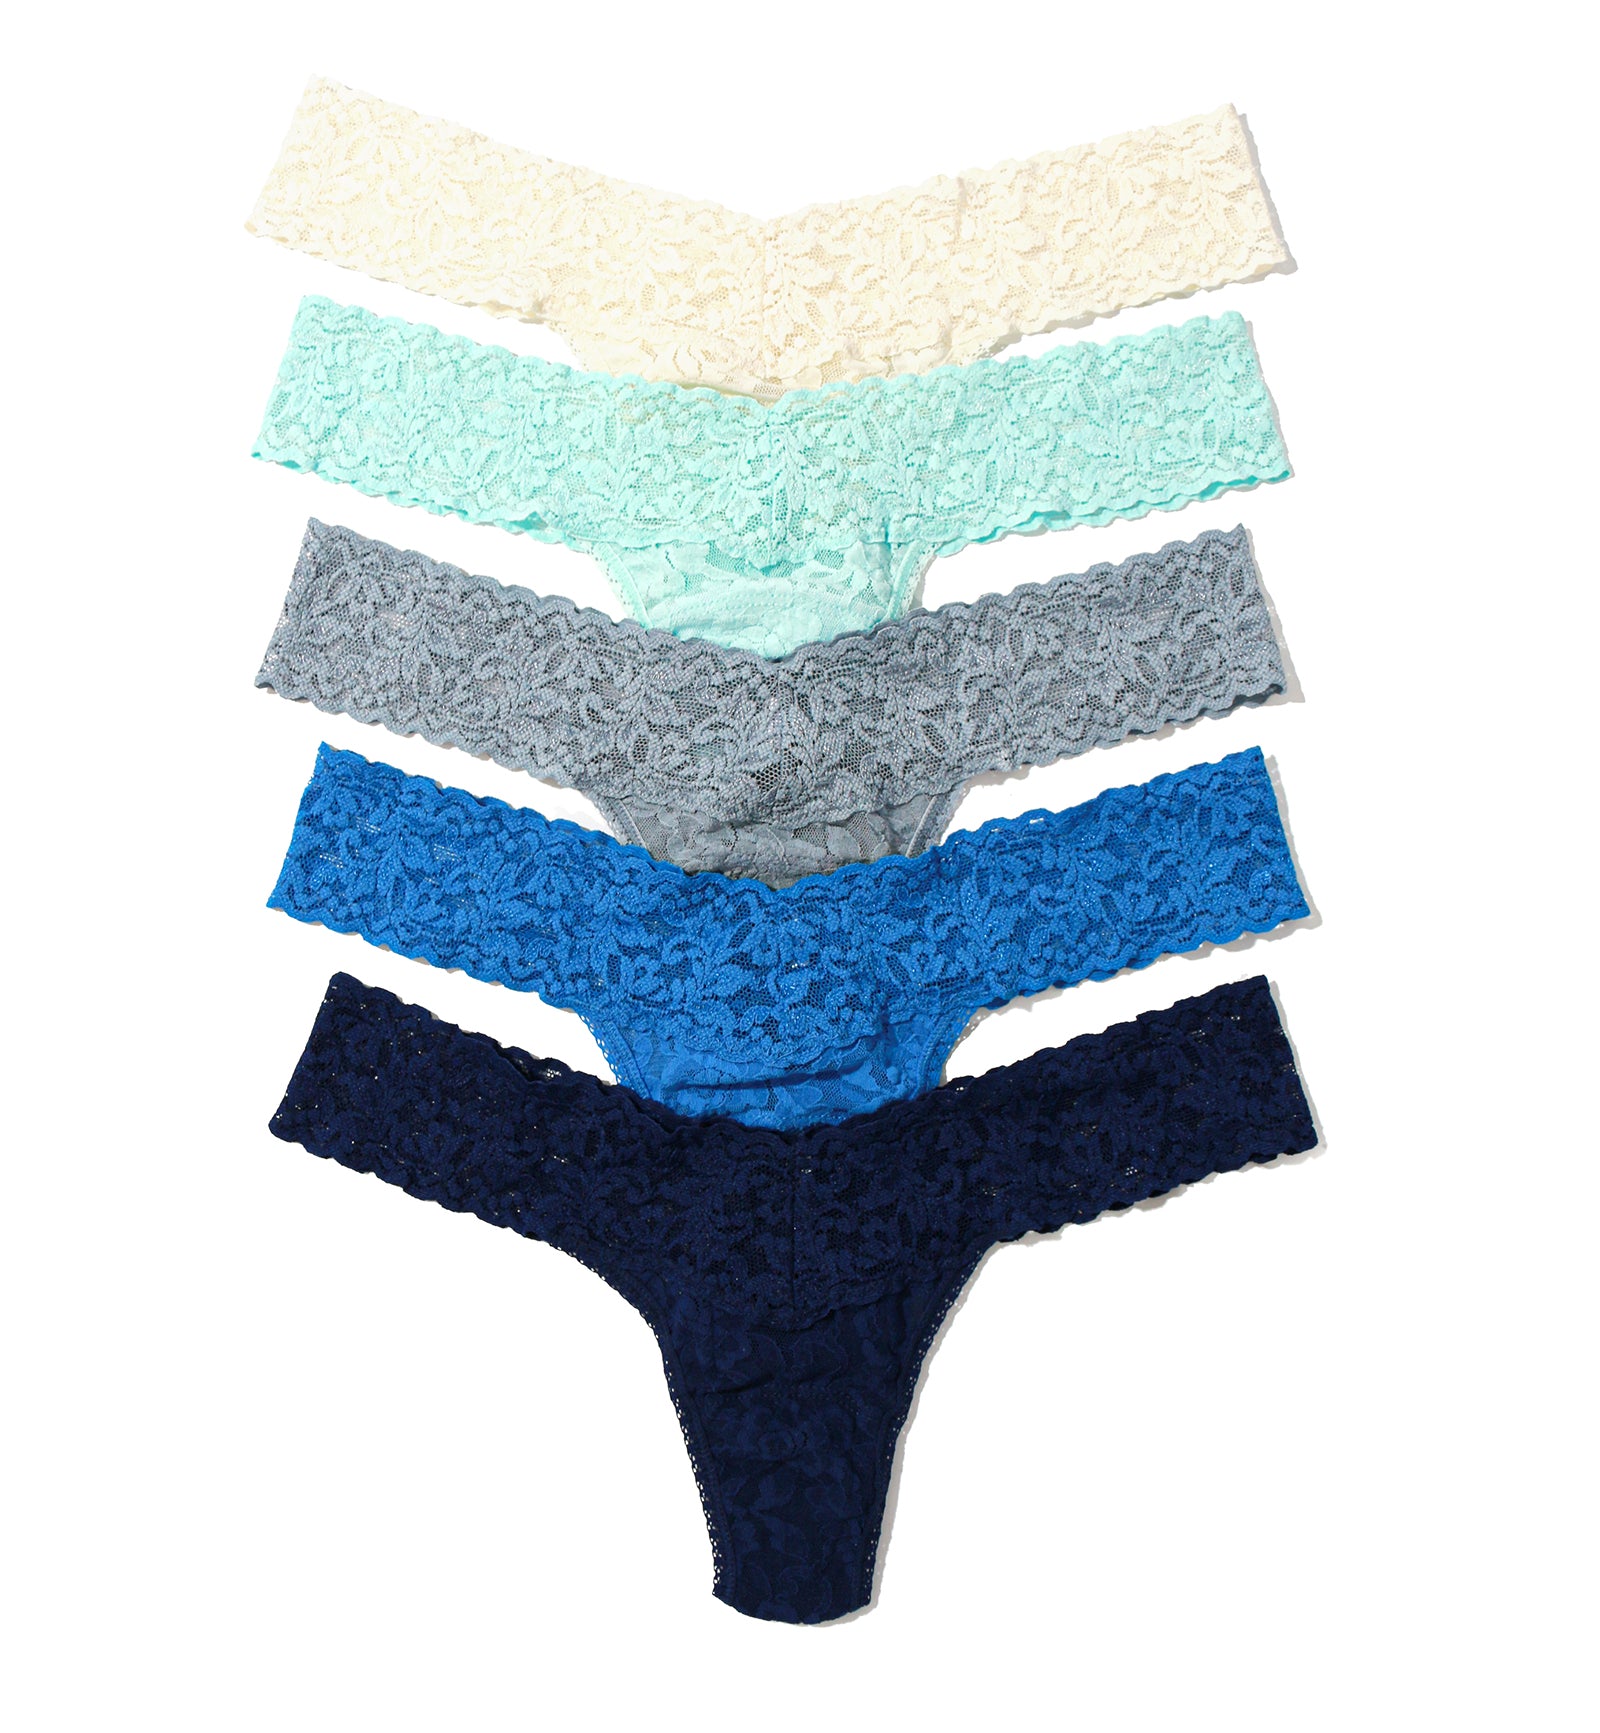 Hanky Panky 5-PACK Signature Lace Low Rise Thong (49115PK),Sea You - Ivory/ Celeste/ Grey Mist/ Sea Blue/ Oxford Blue,One Size